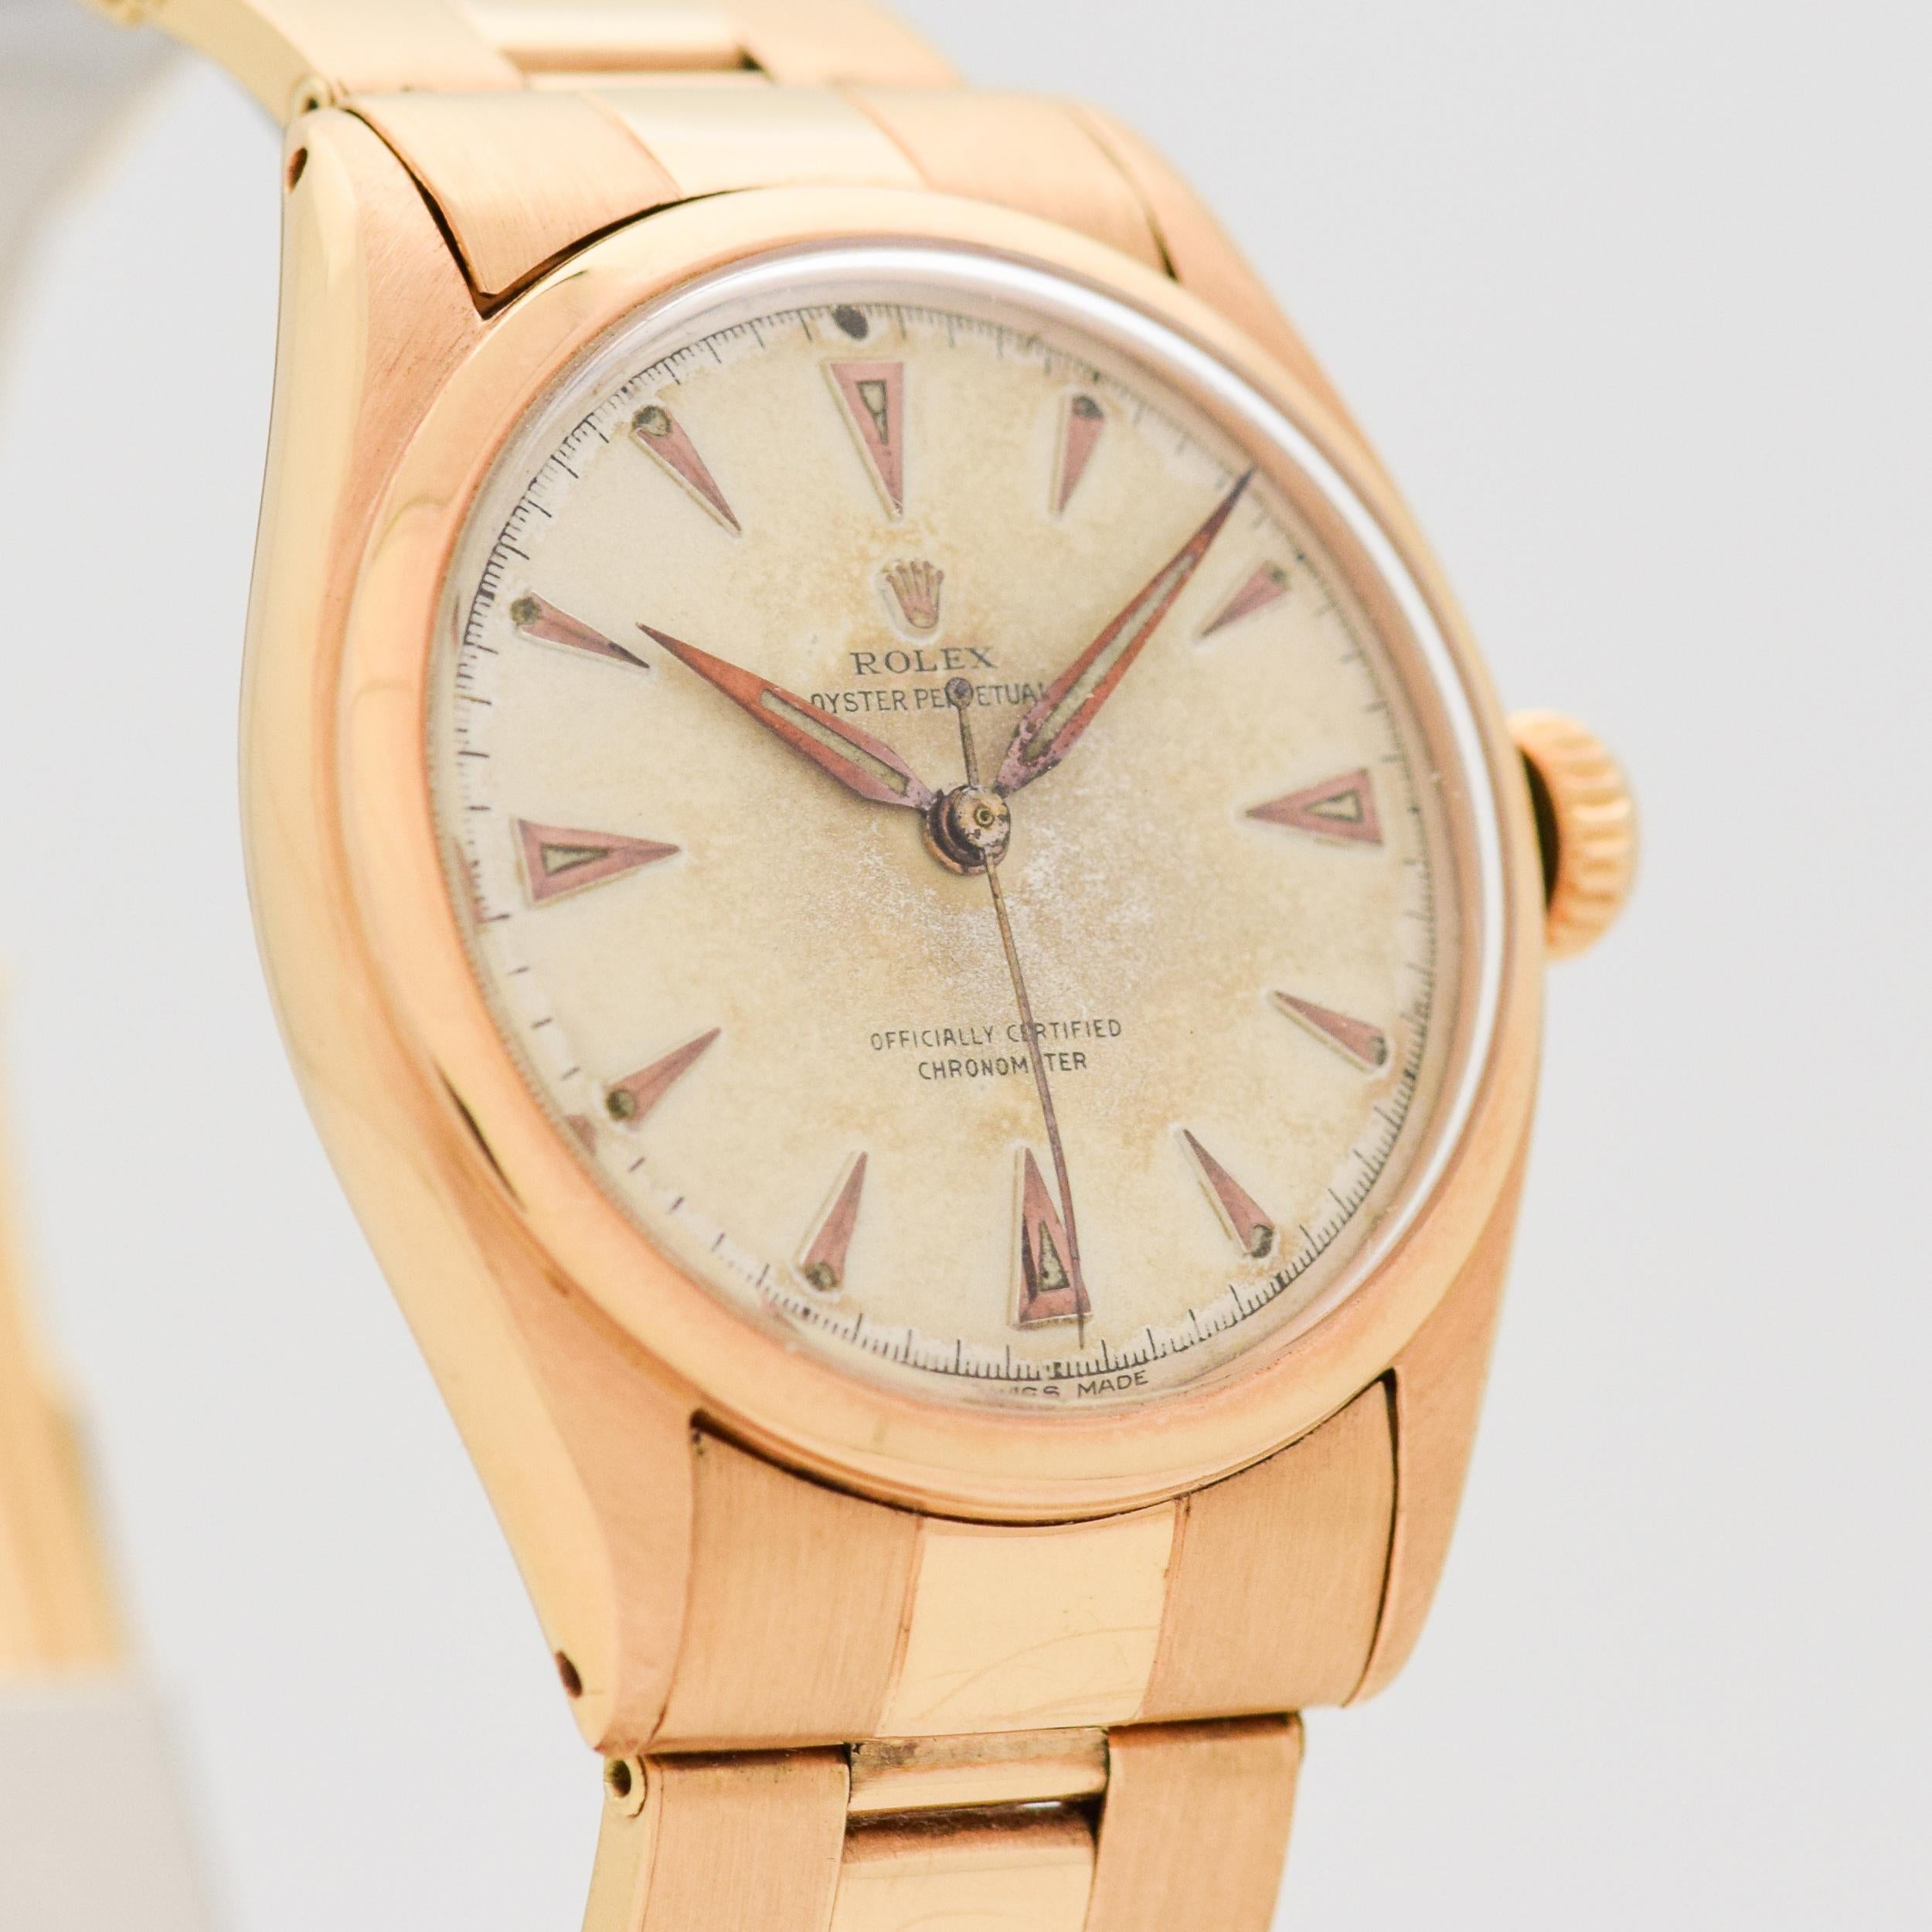 1950 Vintage Rolex Extremely Rare Early Oyster Perpetual 'Super Oyster' Ref. 6084 18k Rose Gold watch with Original Silver Dial with Applied Rose Gold Arrow Markers with Newer Rolex 18k Rose Gold Riveted 'Oyster' Reproduction Vintage Style Bracelet.